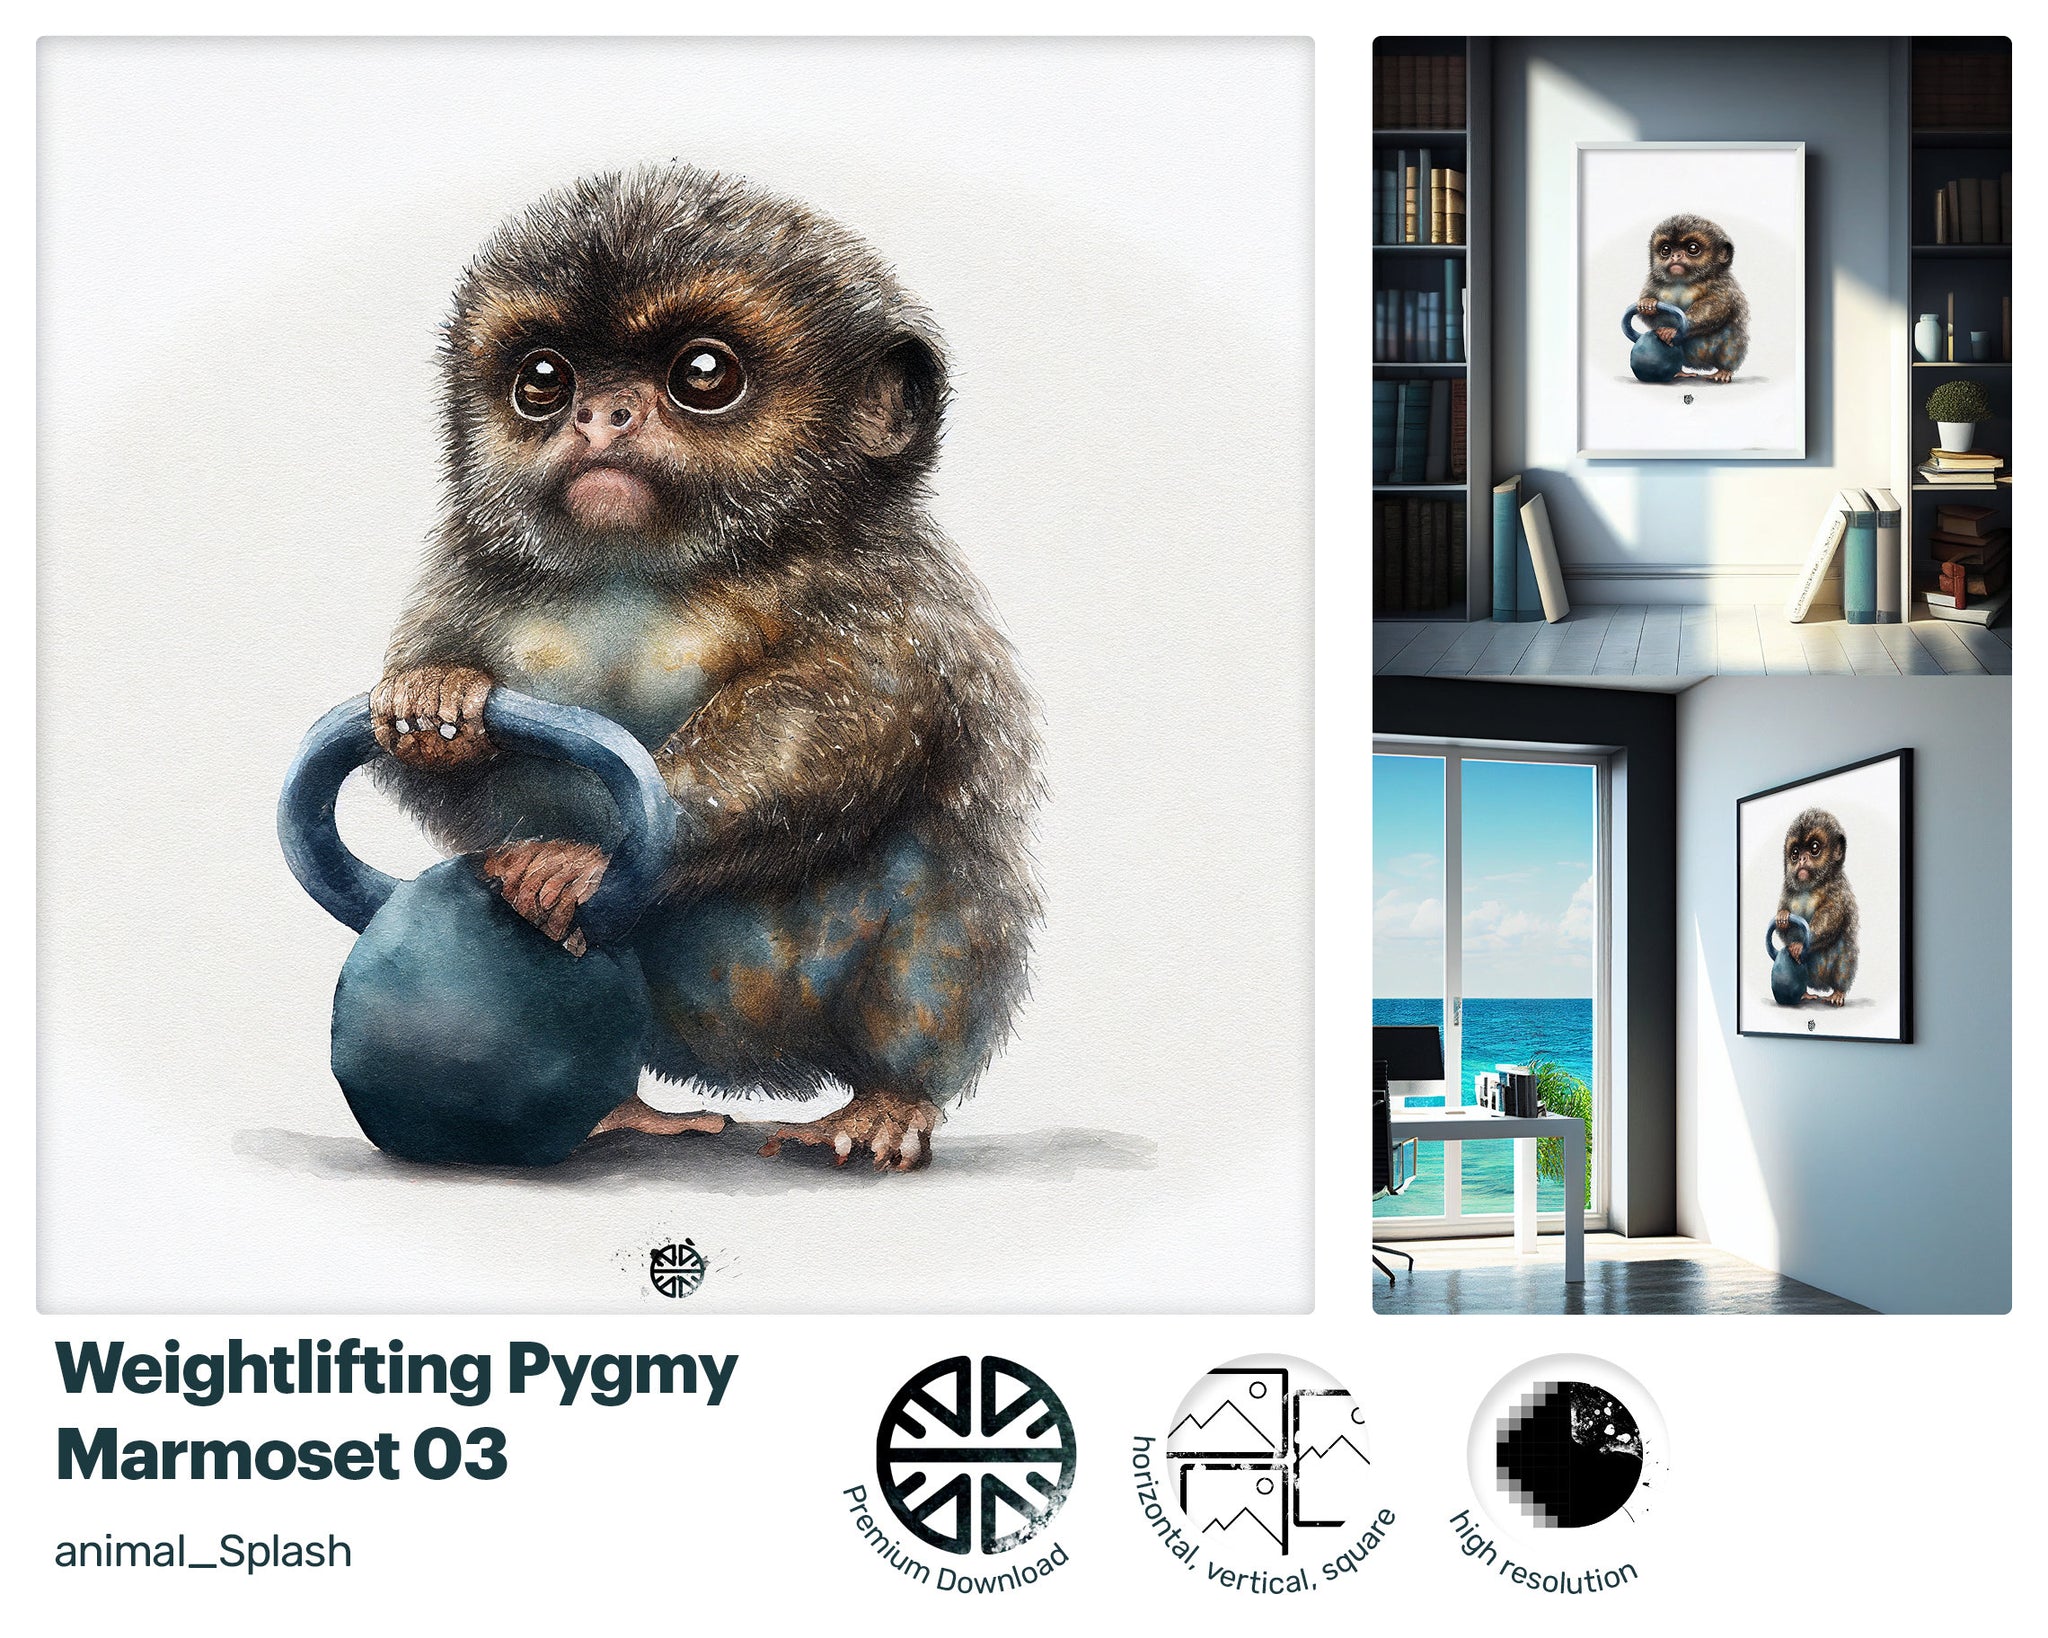 Pygmy Marmoset, Gift for kids, Printable Wall Art, premium download Cute Animal, Digital Download Print, drops and splashes